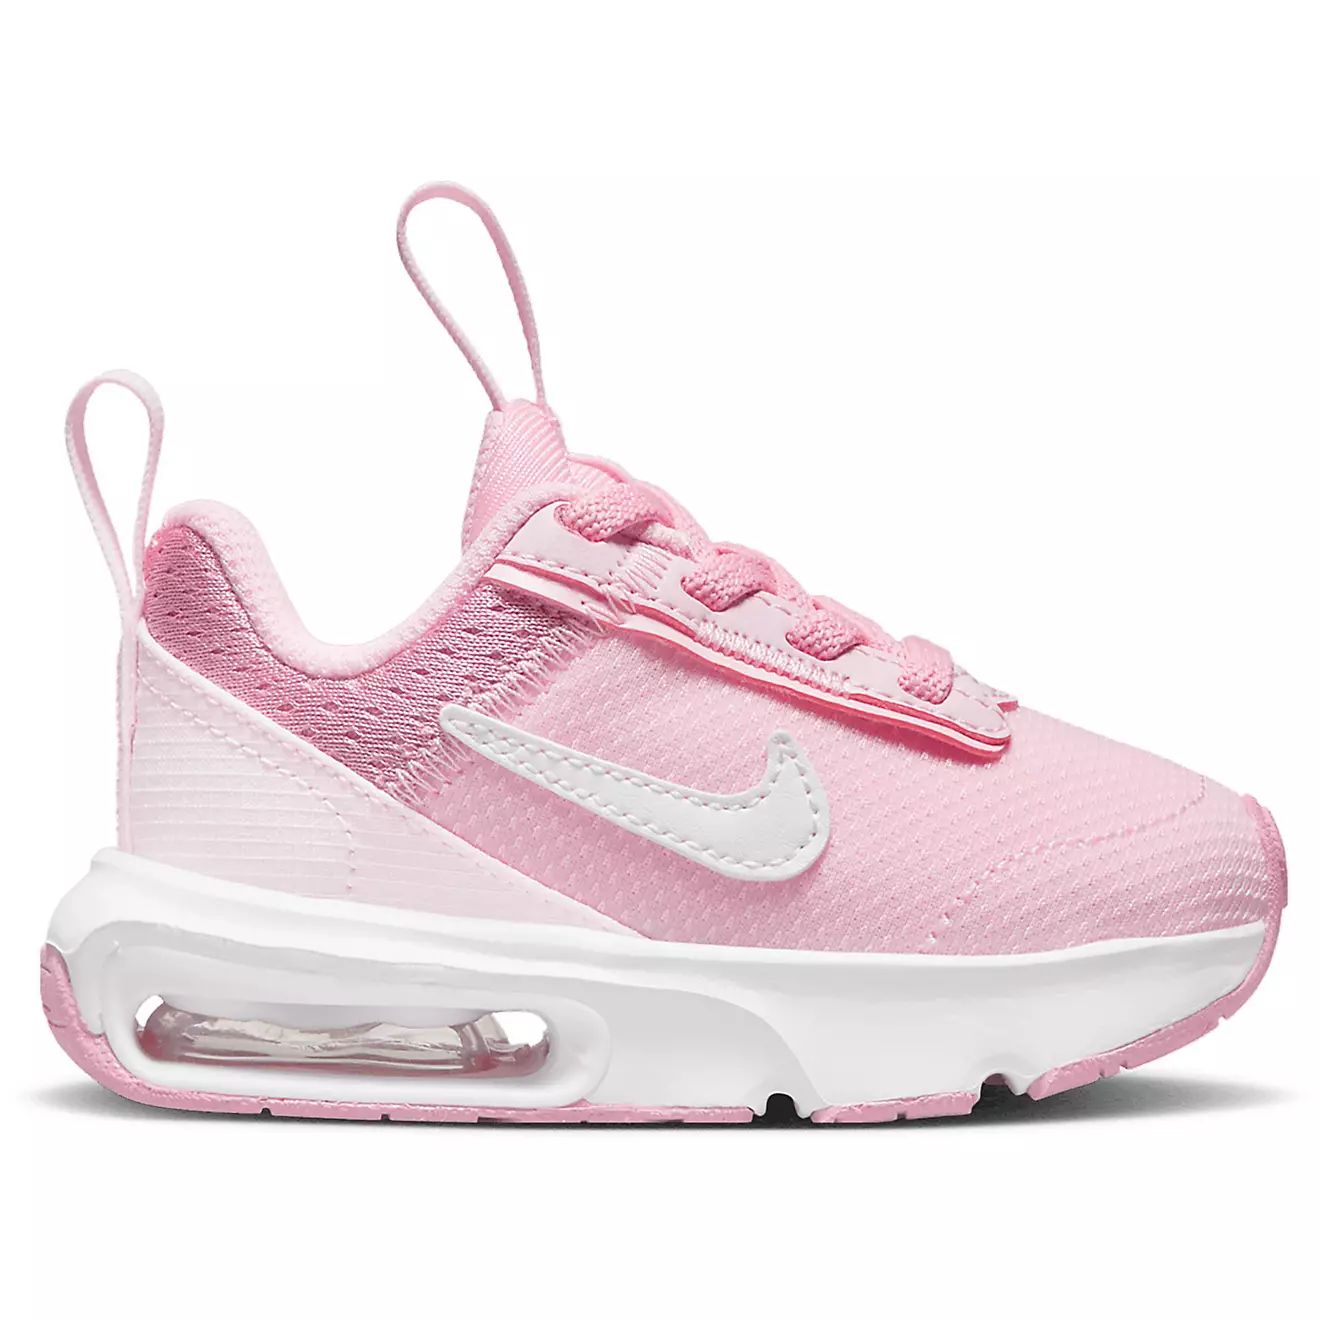 Nike Tdlr Air Max Intrlk TD Shoes | Academy | Academy Sports + Outdoors